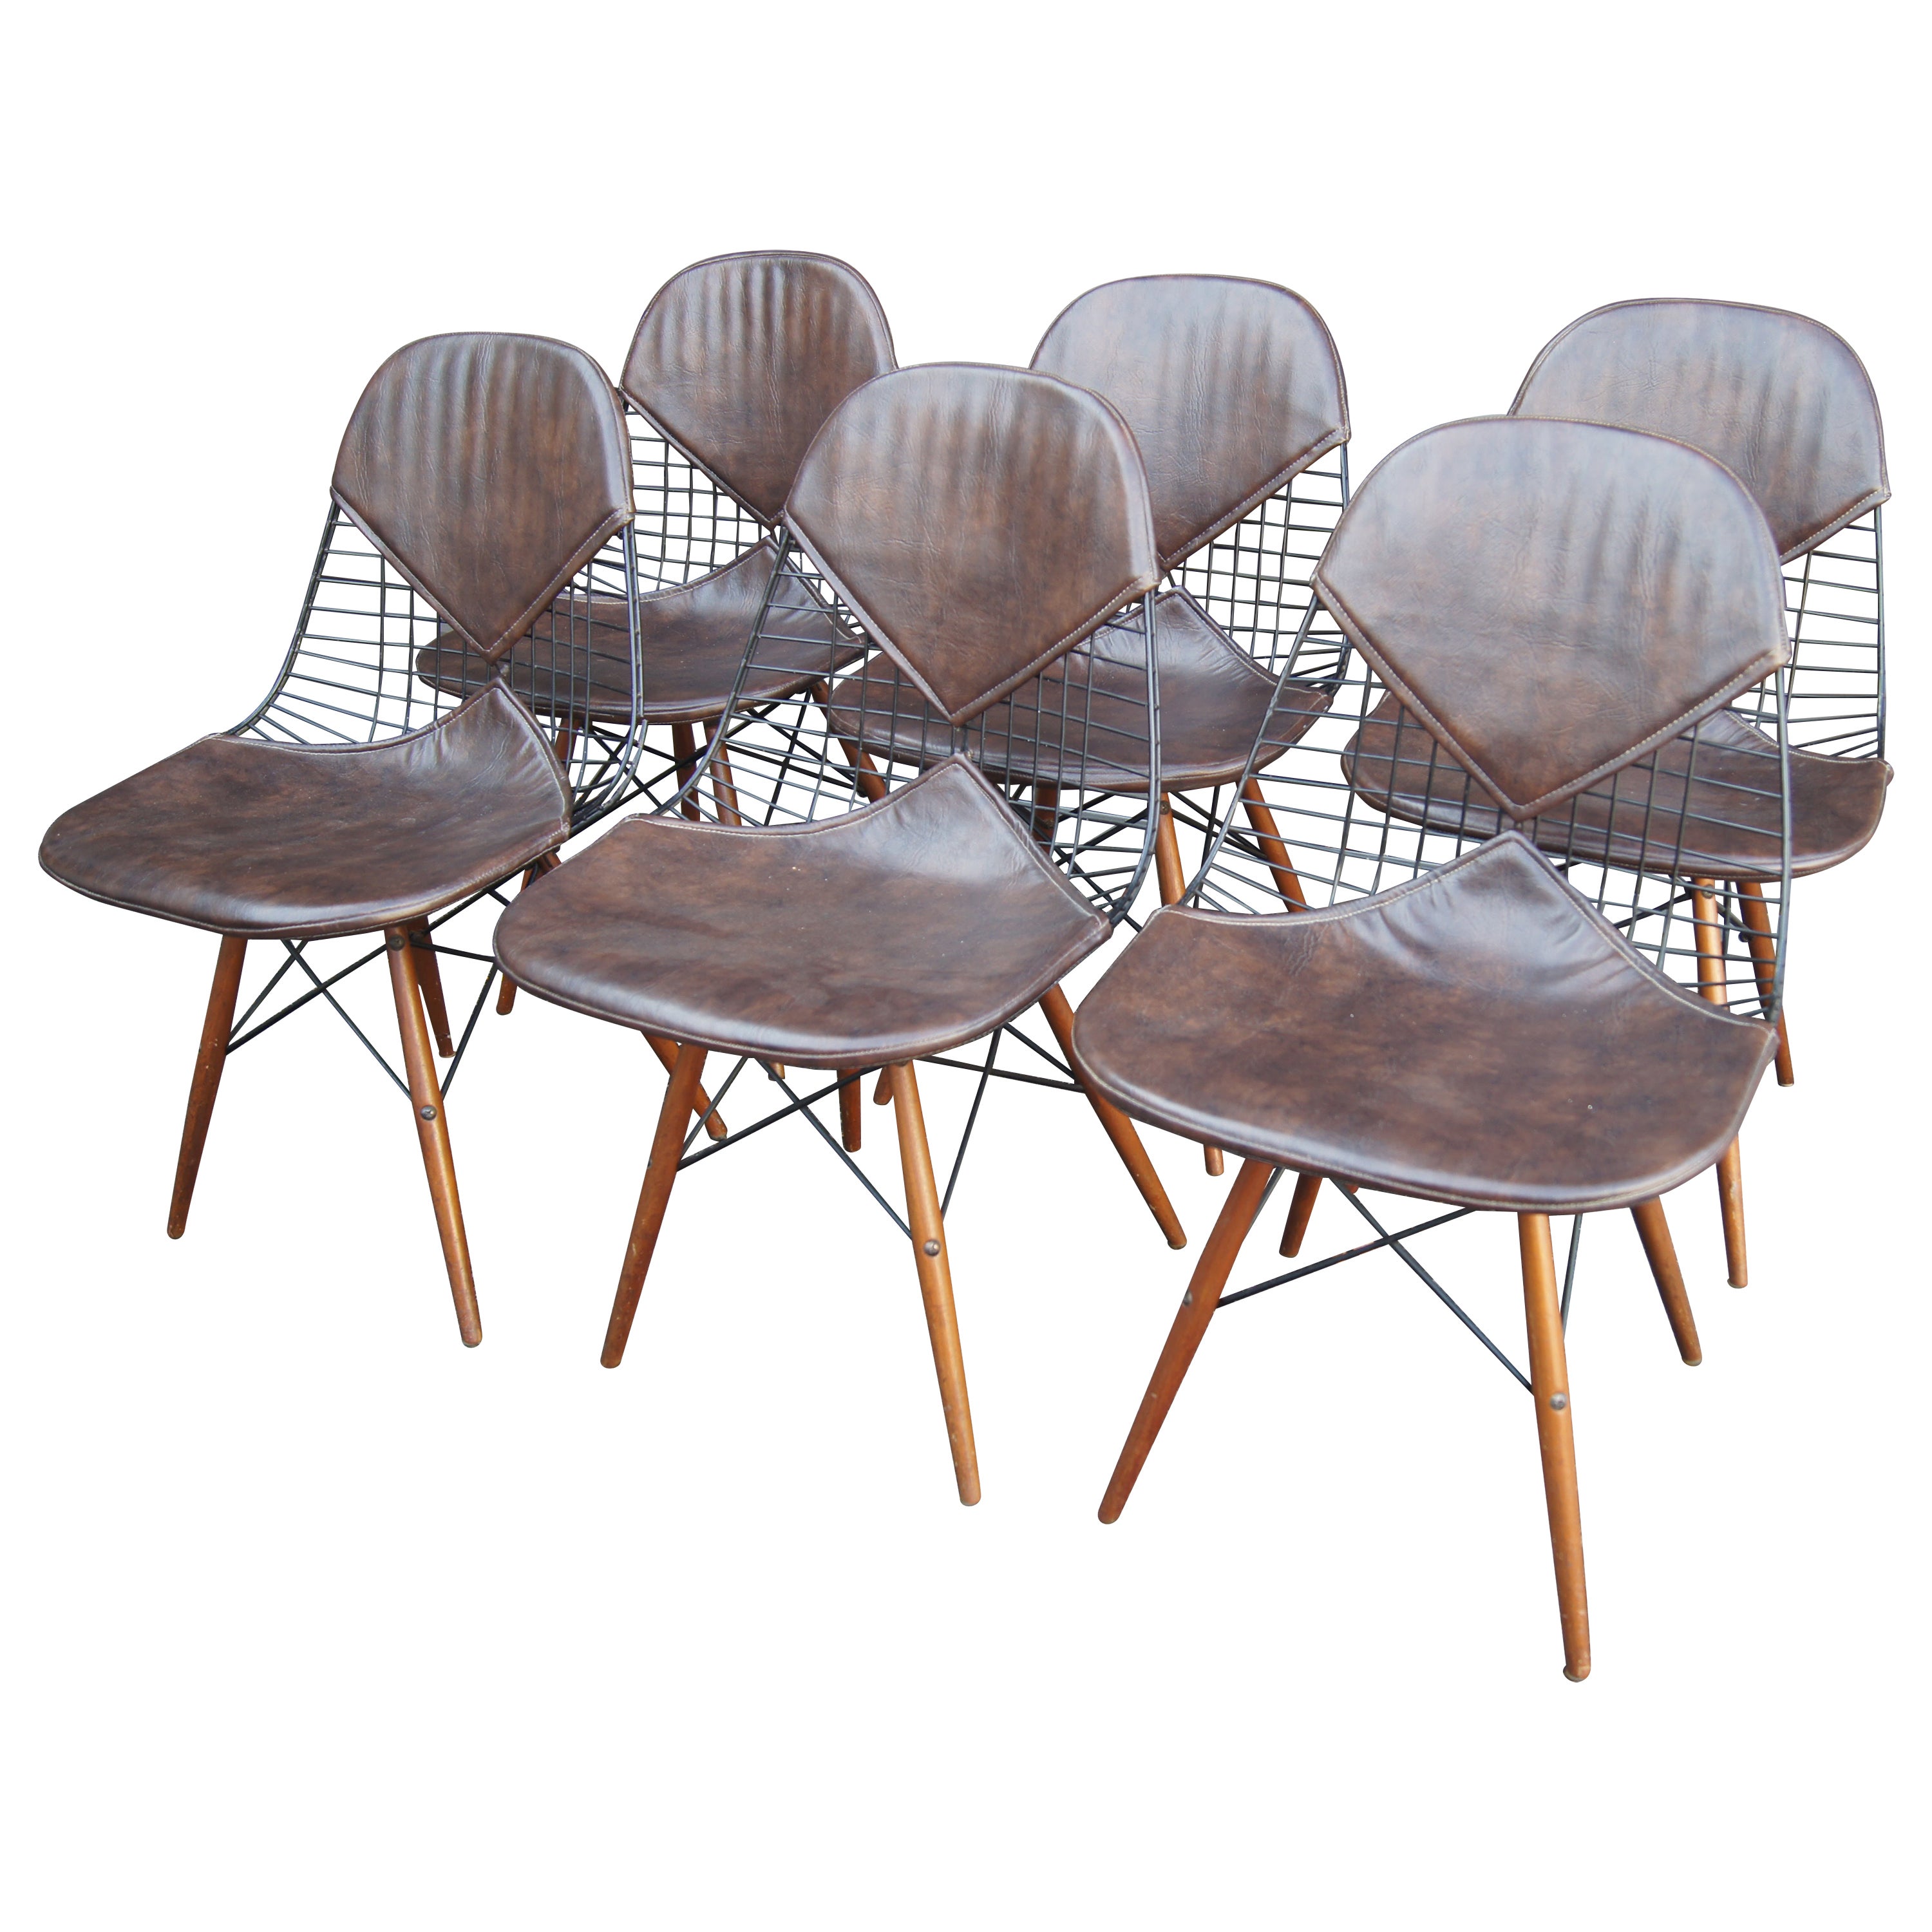 Set of Six Wire Chairs with Dowel Legs and Bikini Pad by Charles and Ray Eames